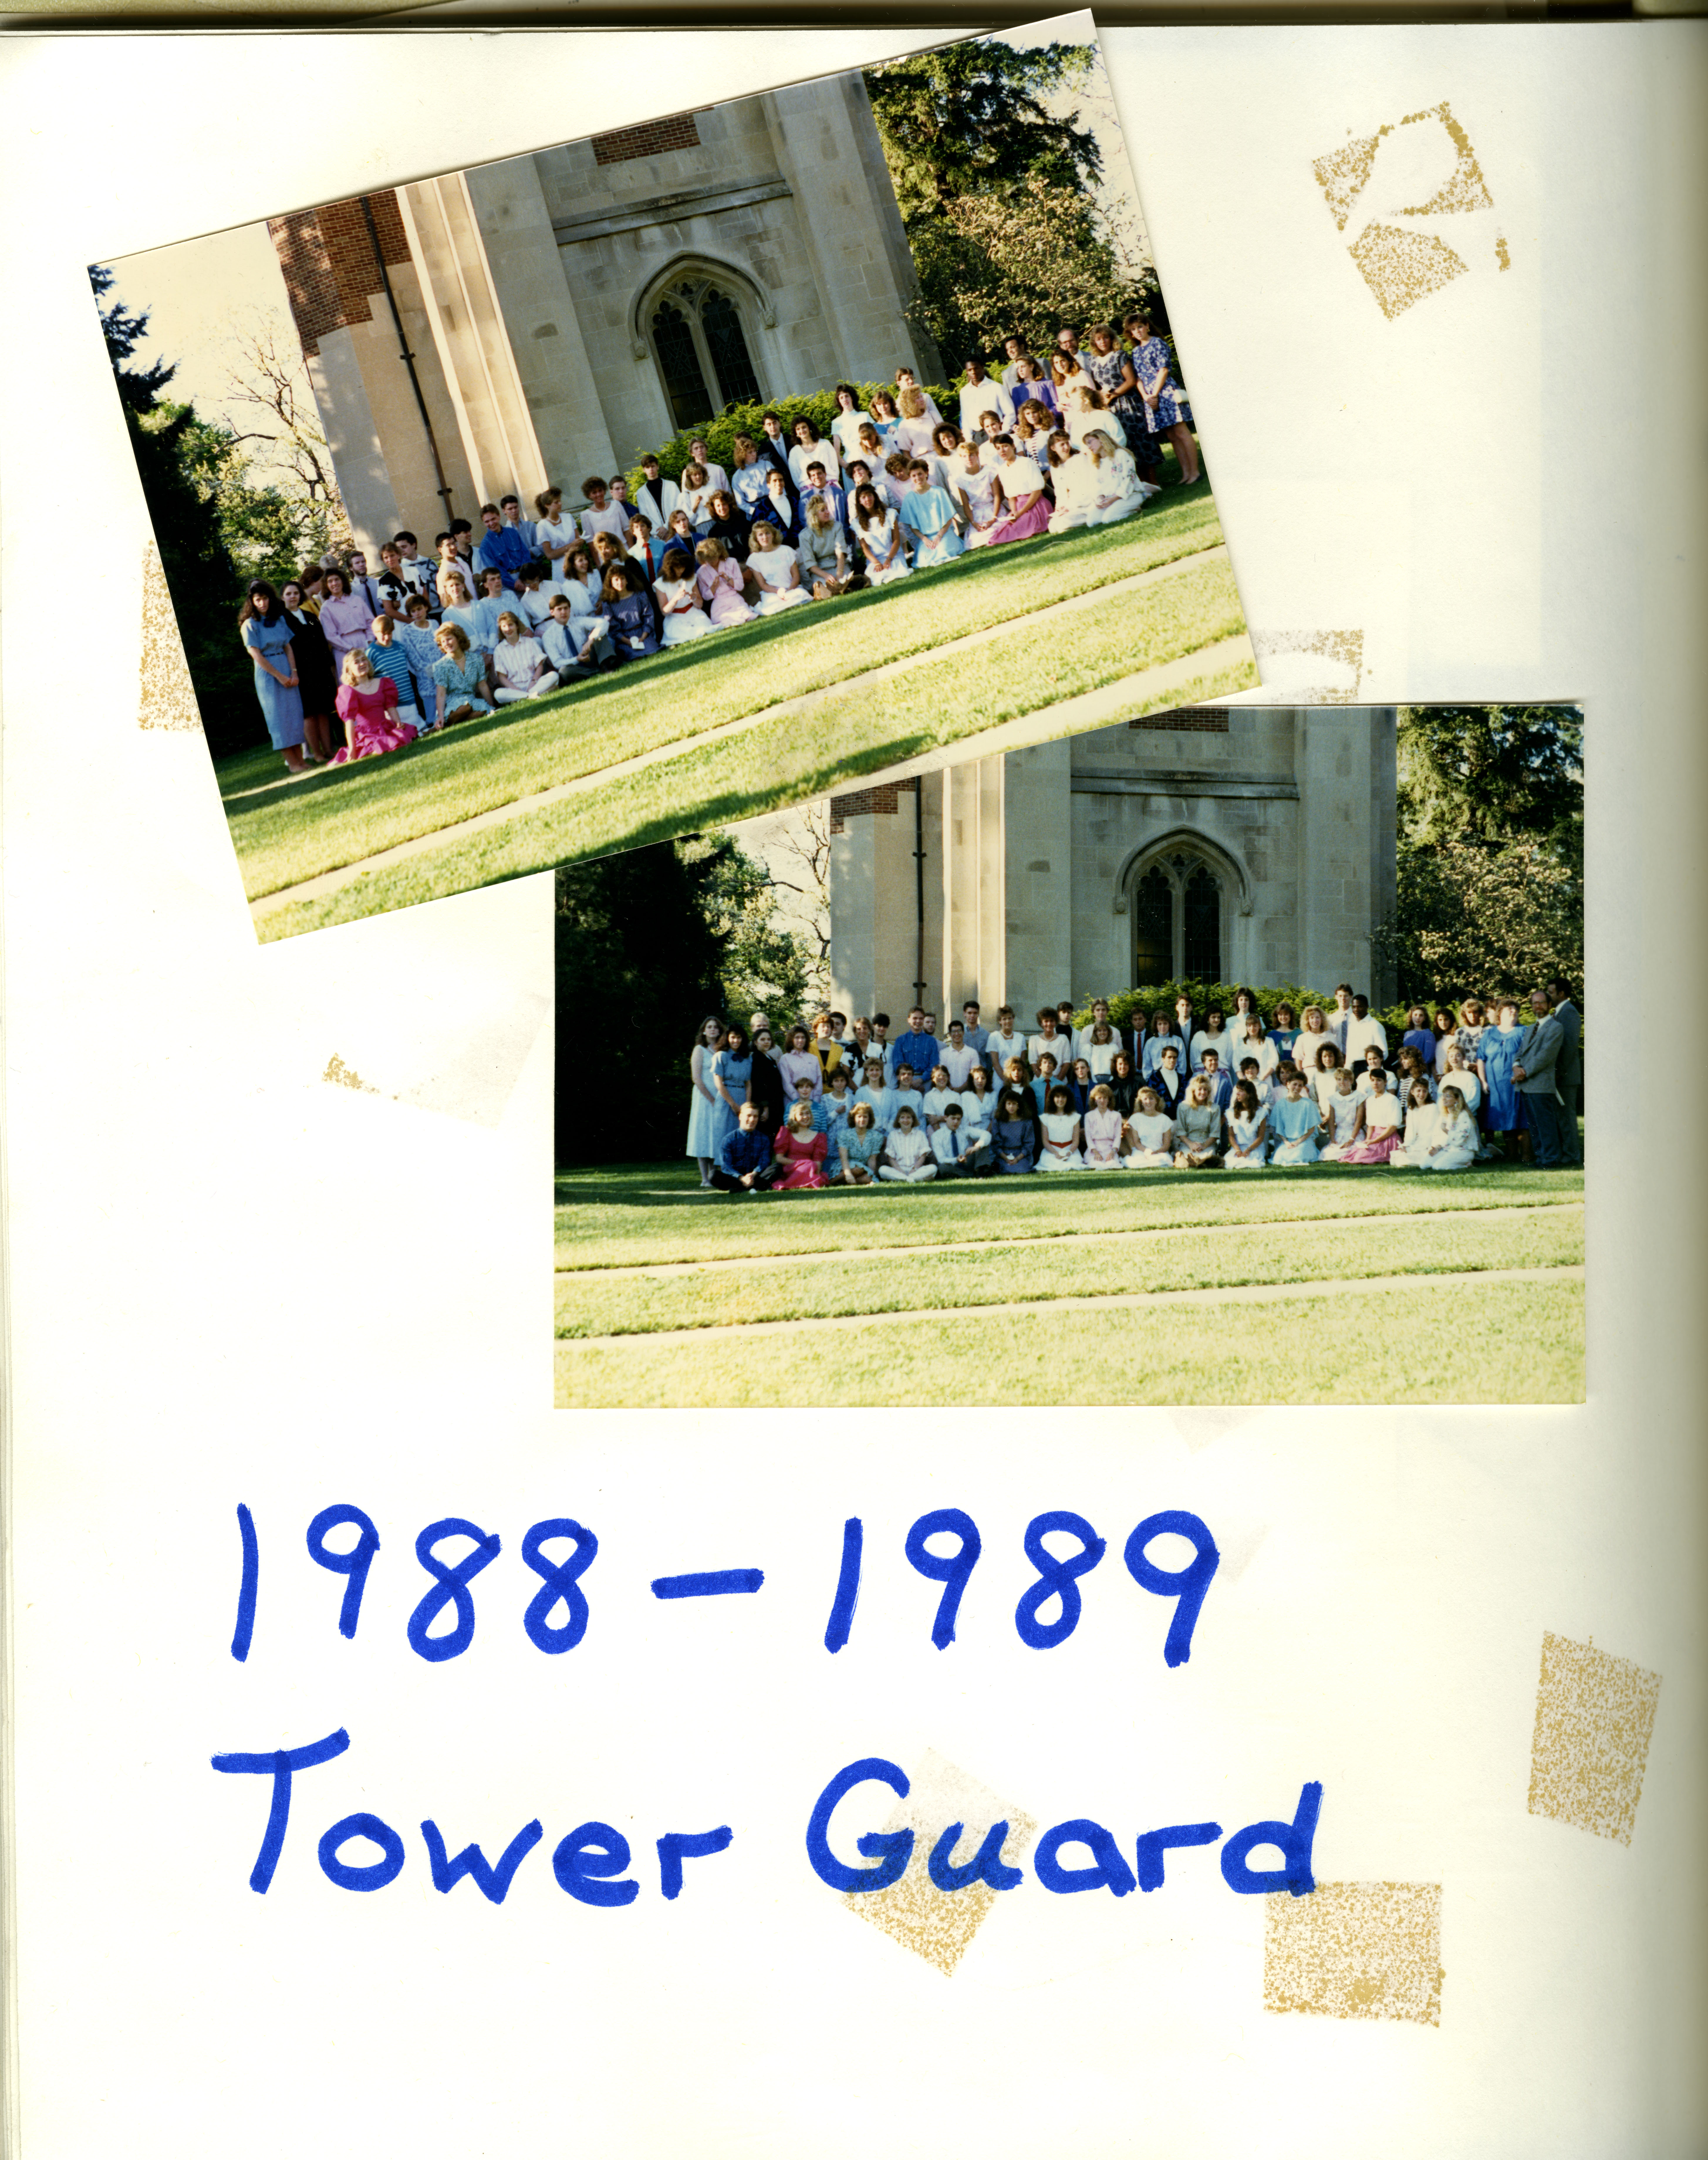 Tower Guard, 1988-1989